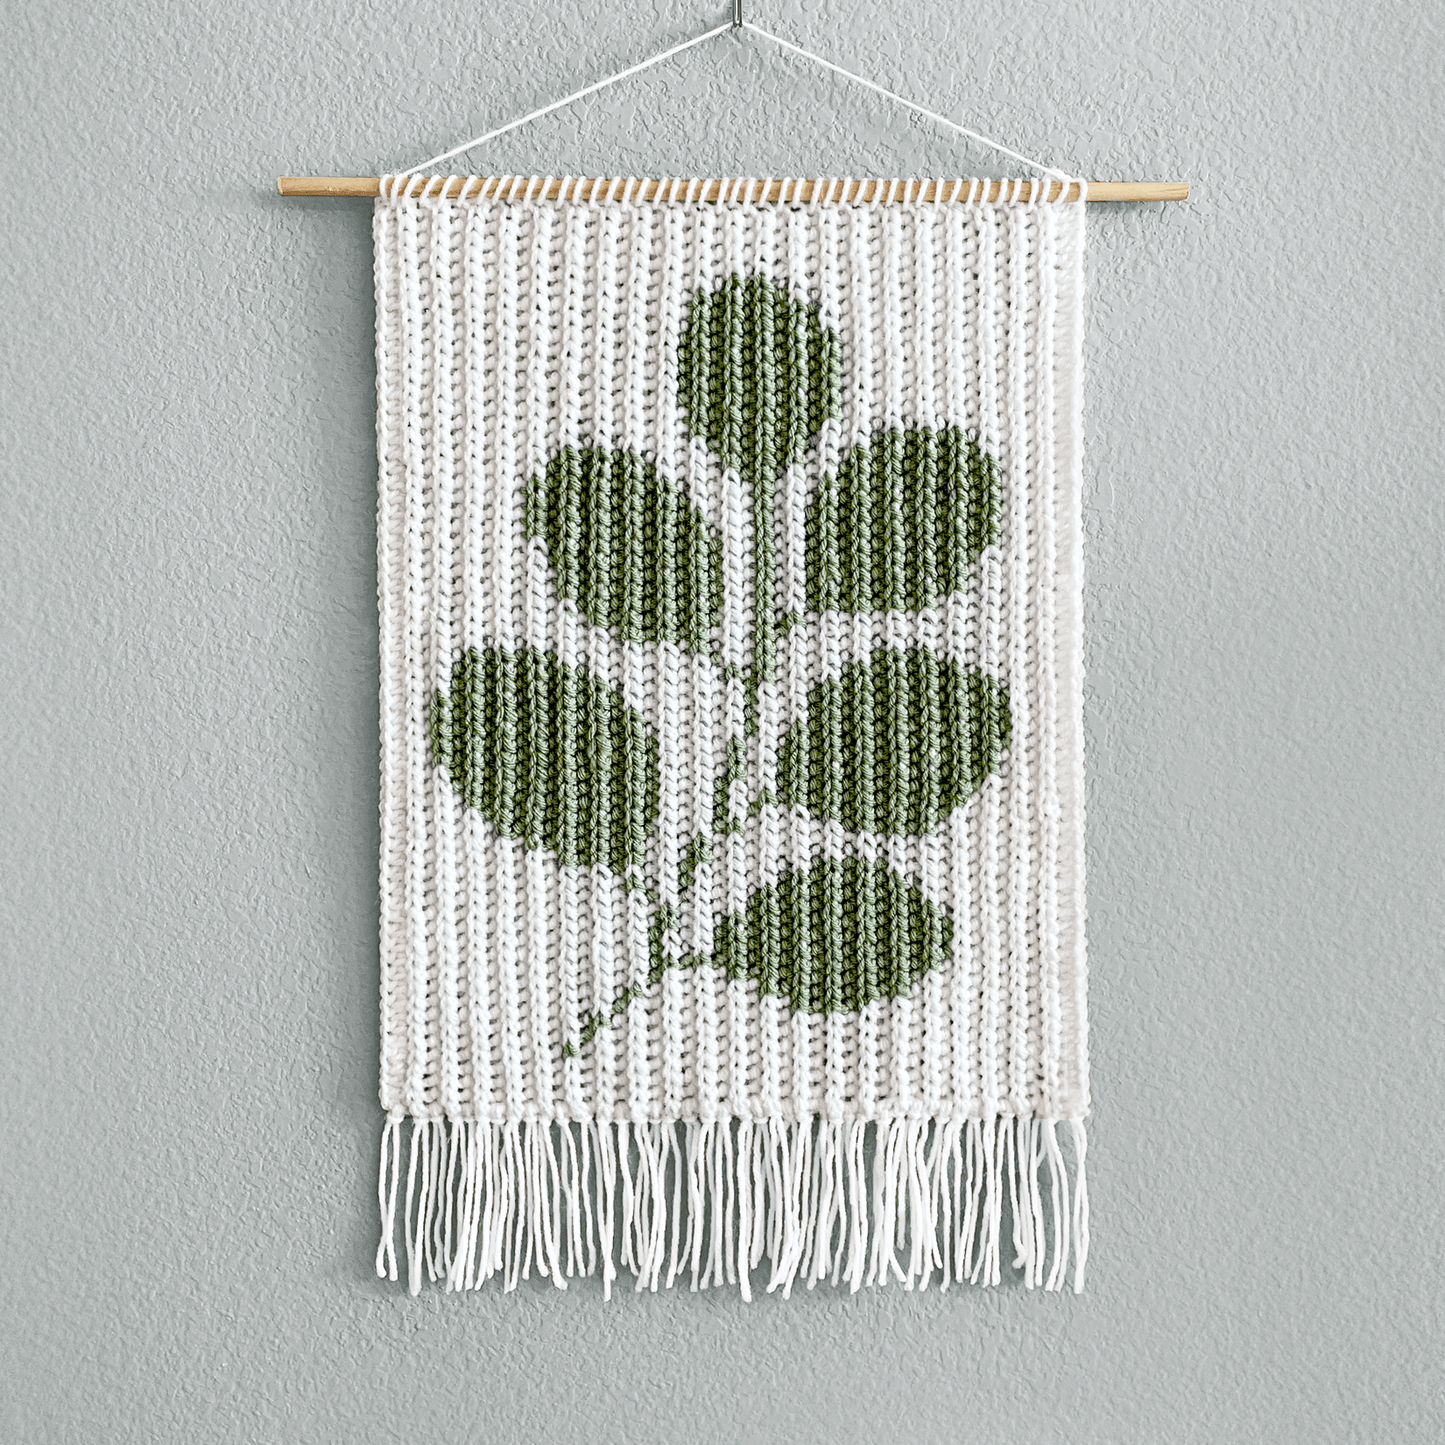 Ribbed Leaves Wall Hanging | Crochet Pattern